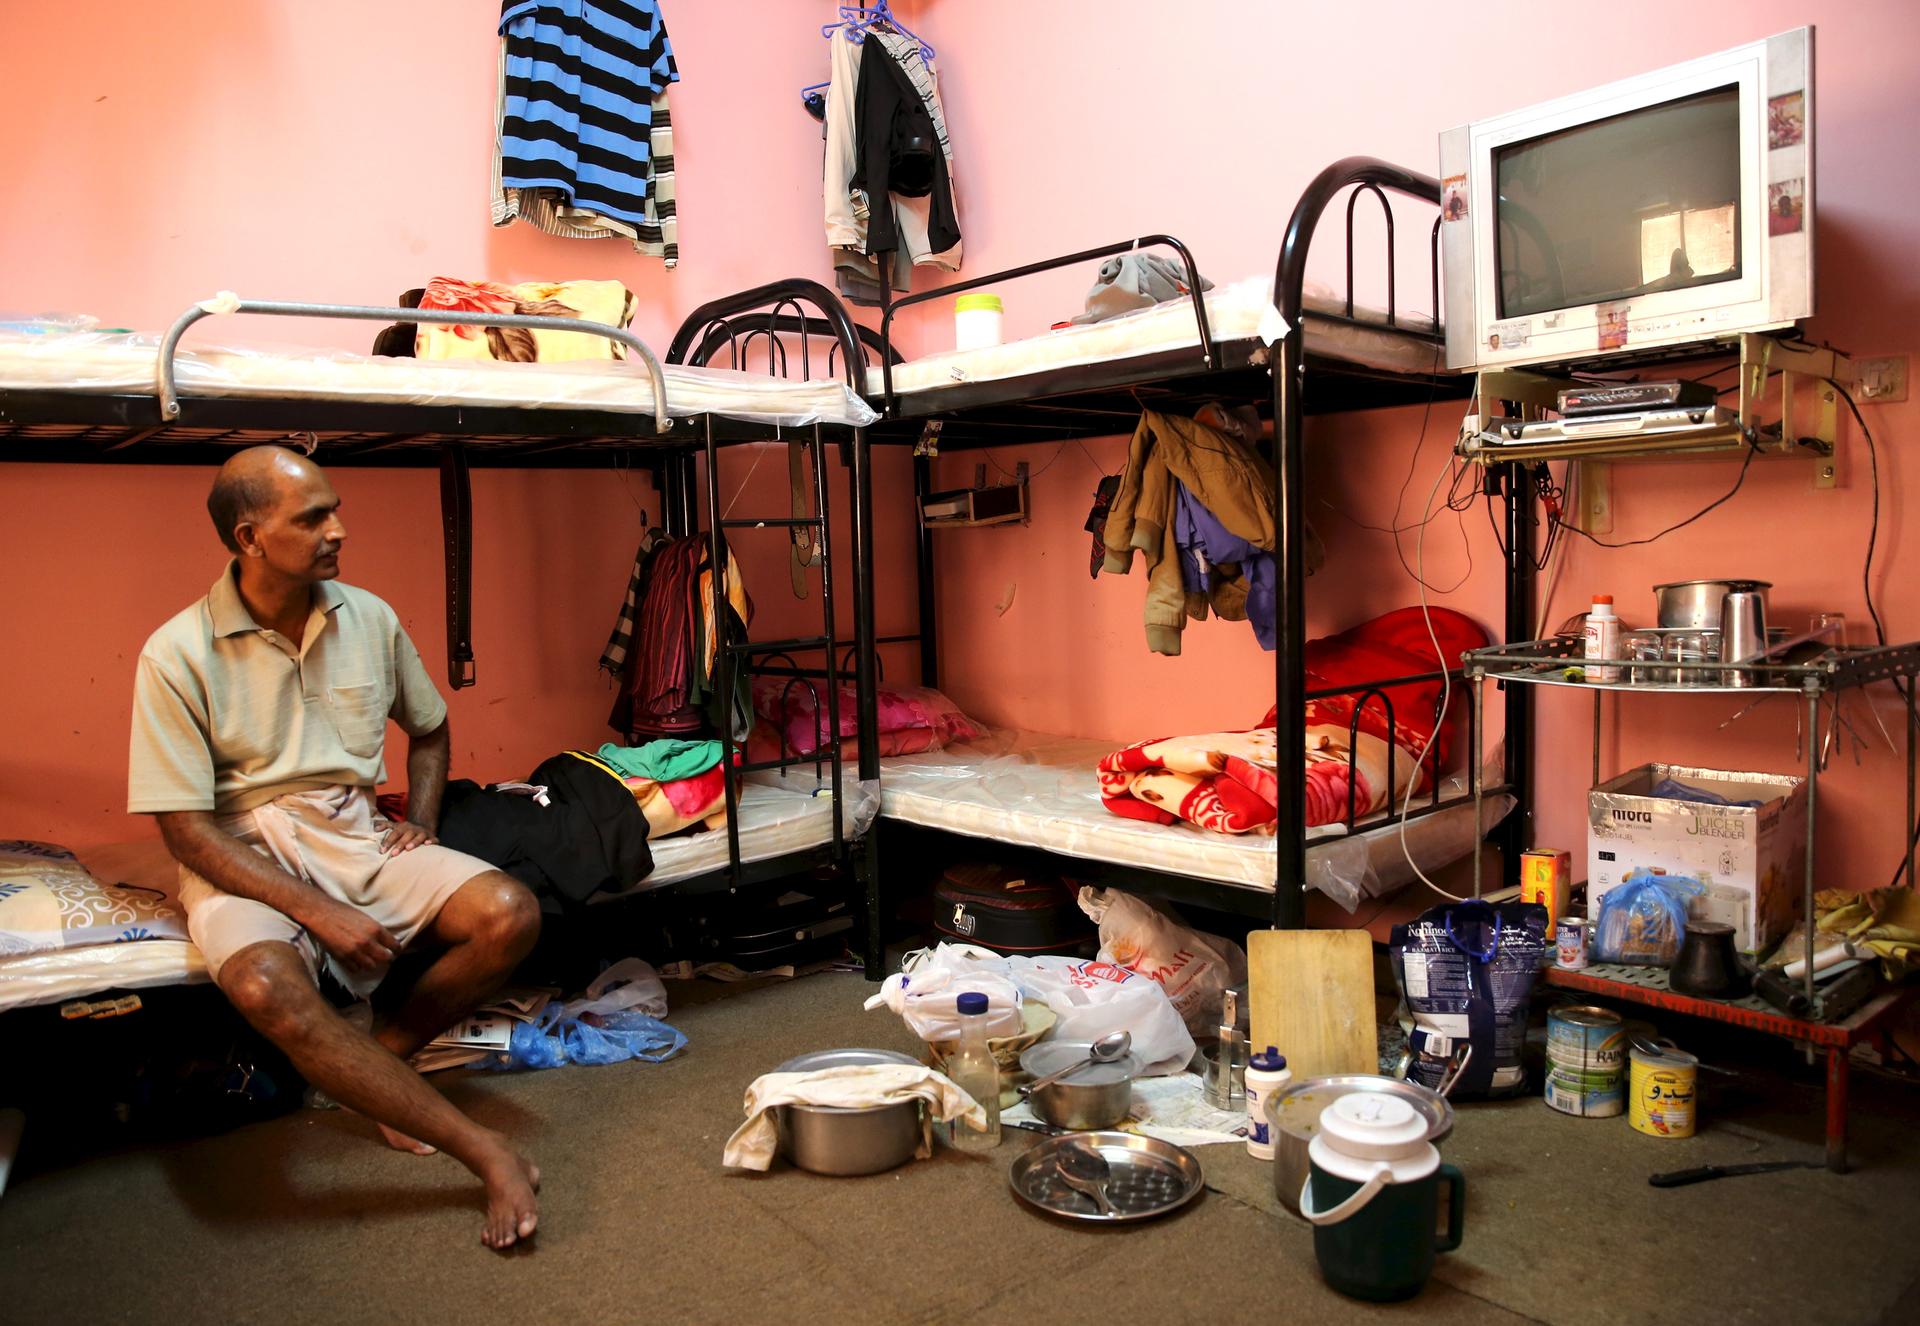 A laborer rests in a dormitory for foreign workers in the Sanaya Industrial Area in Doha during a government-guided tour, on May 3, 2015.